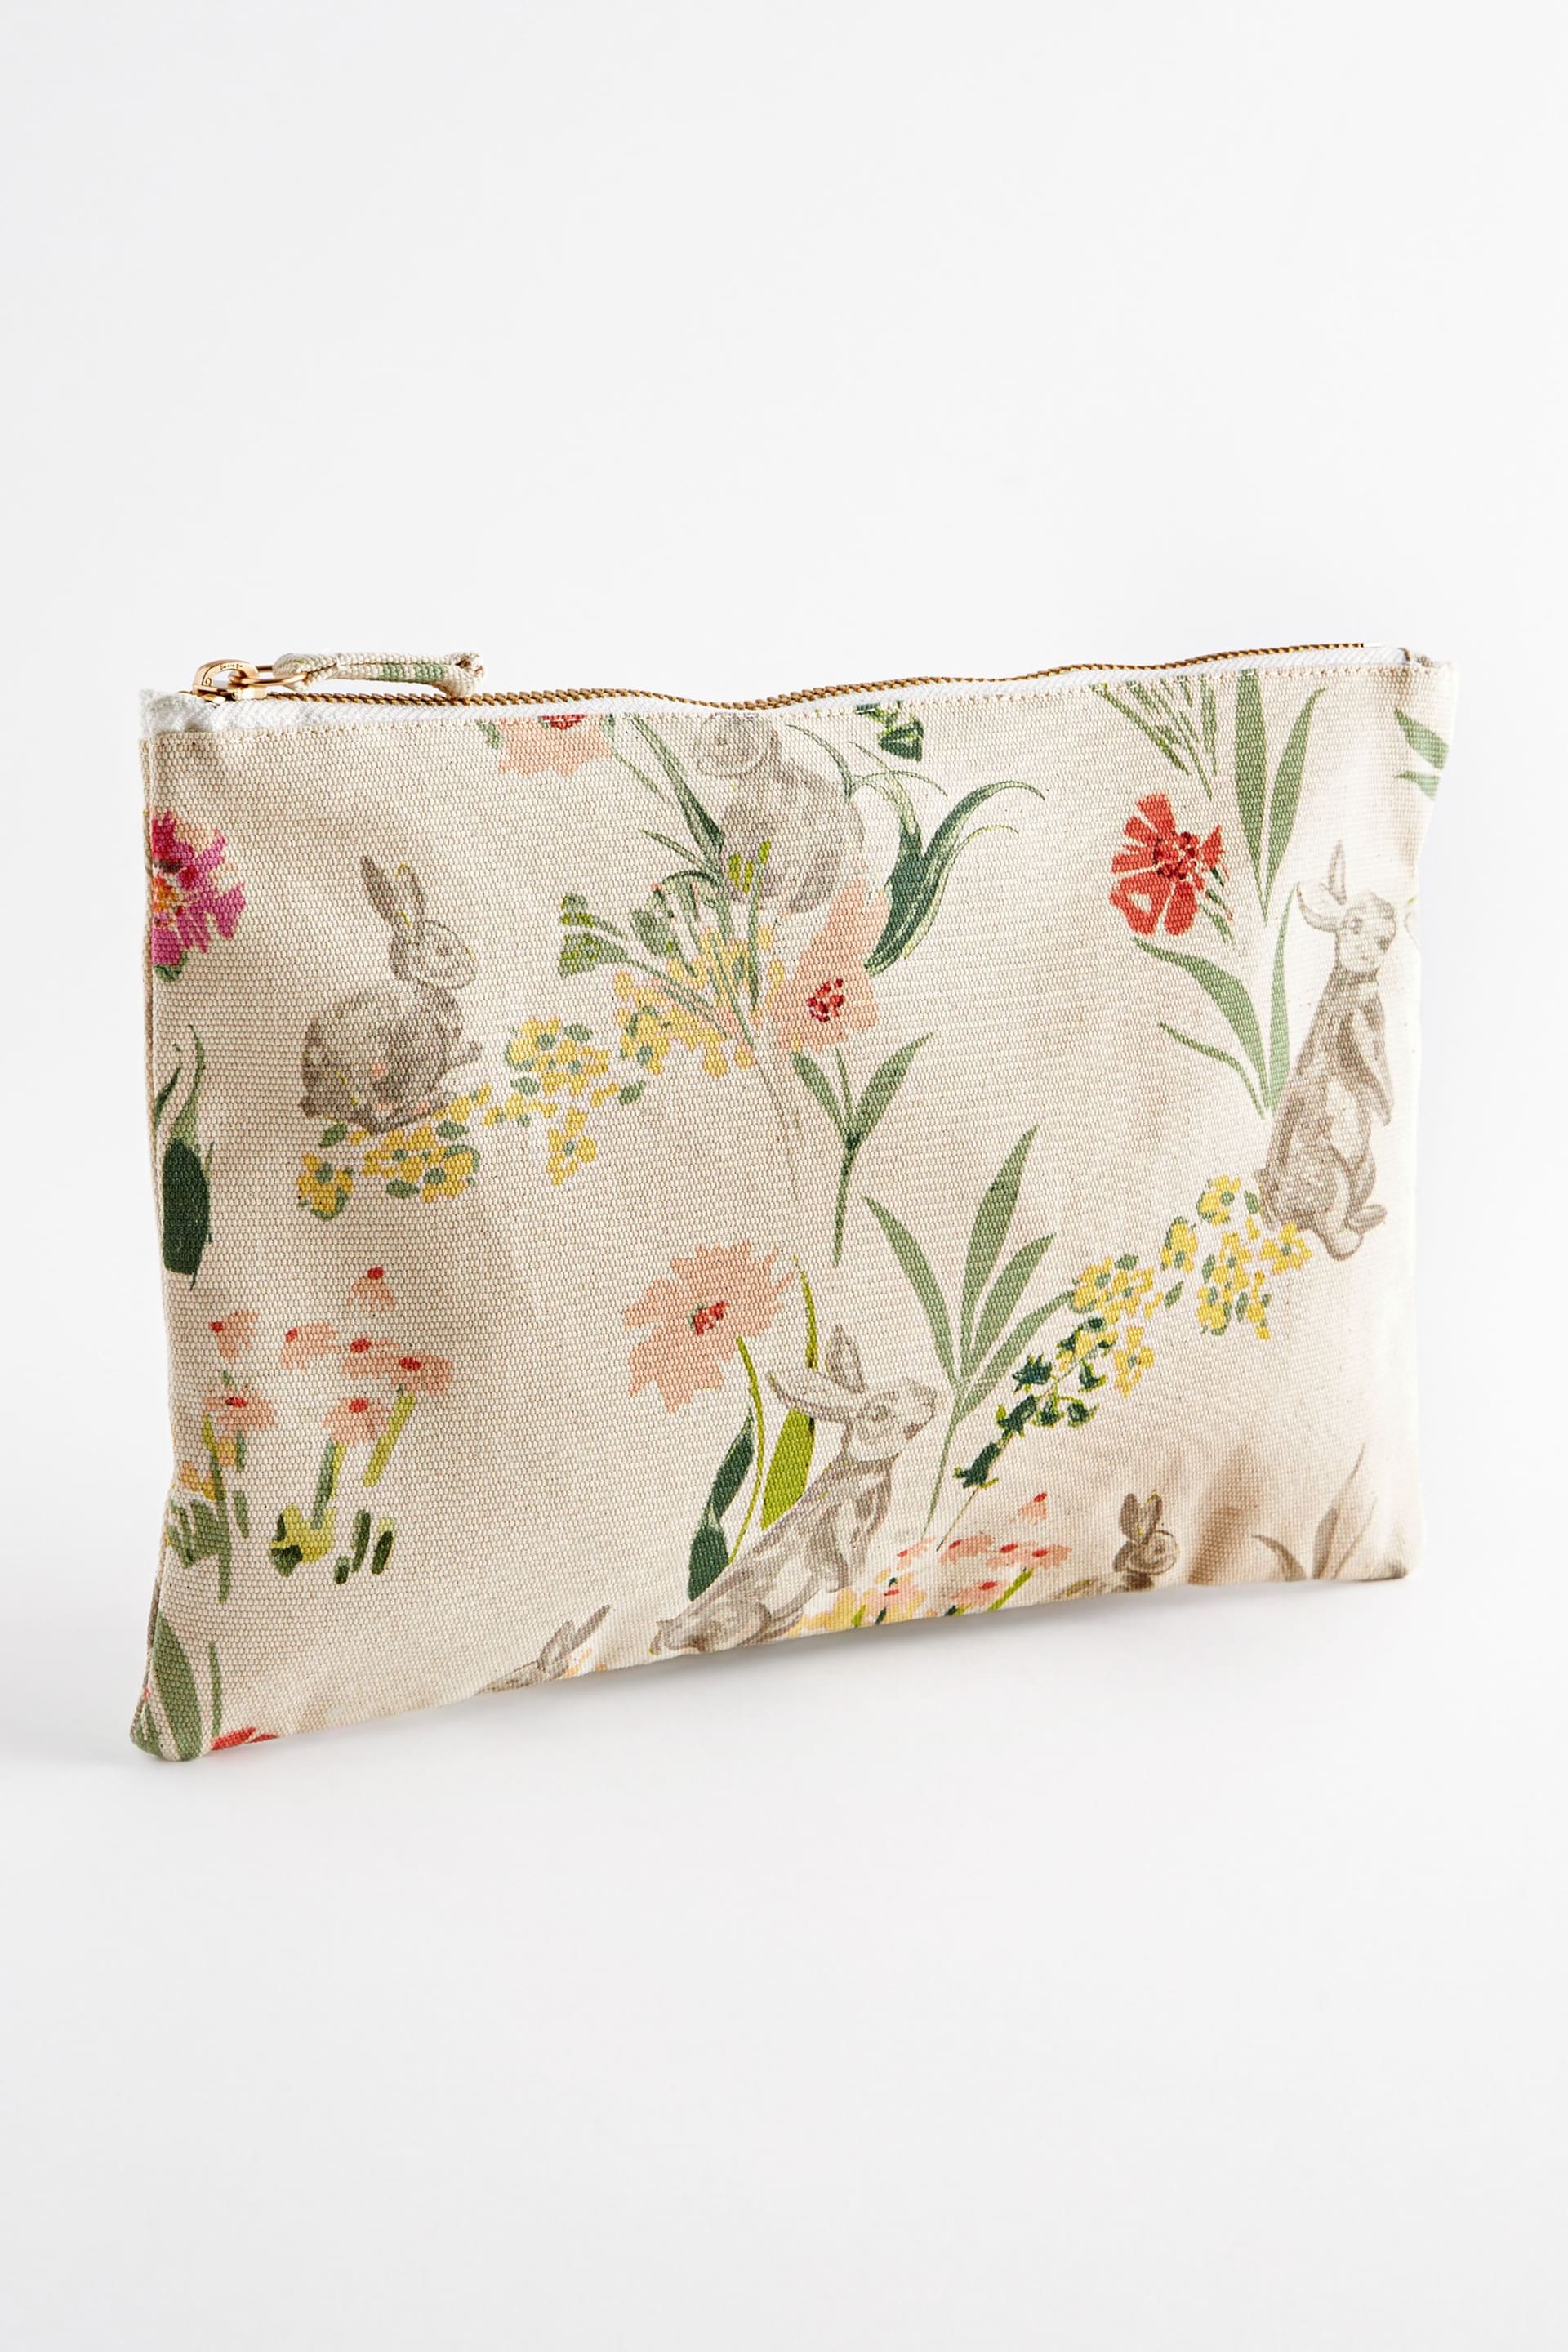 Bunny Print Cotton Canvas Zip Pouch - Image 1 of 5